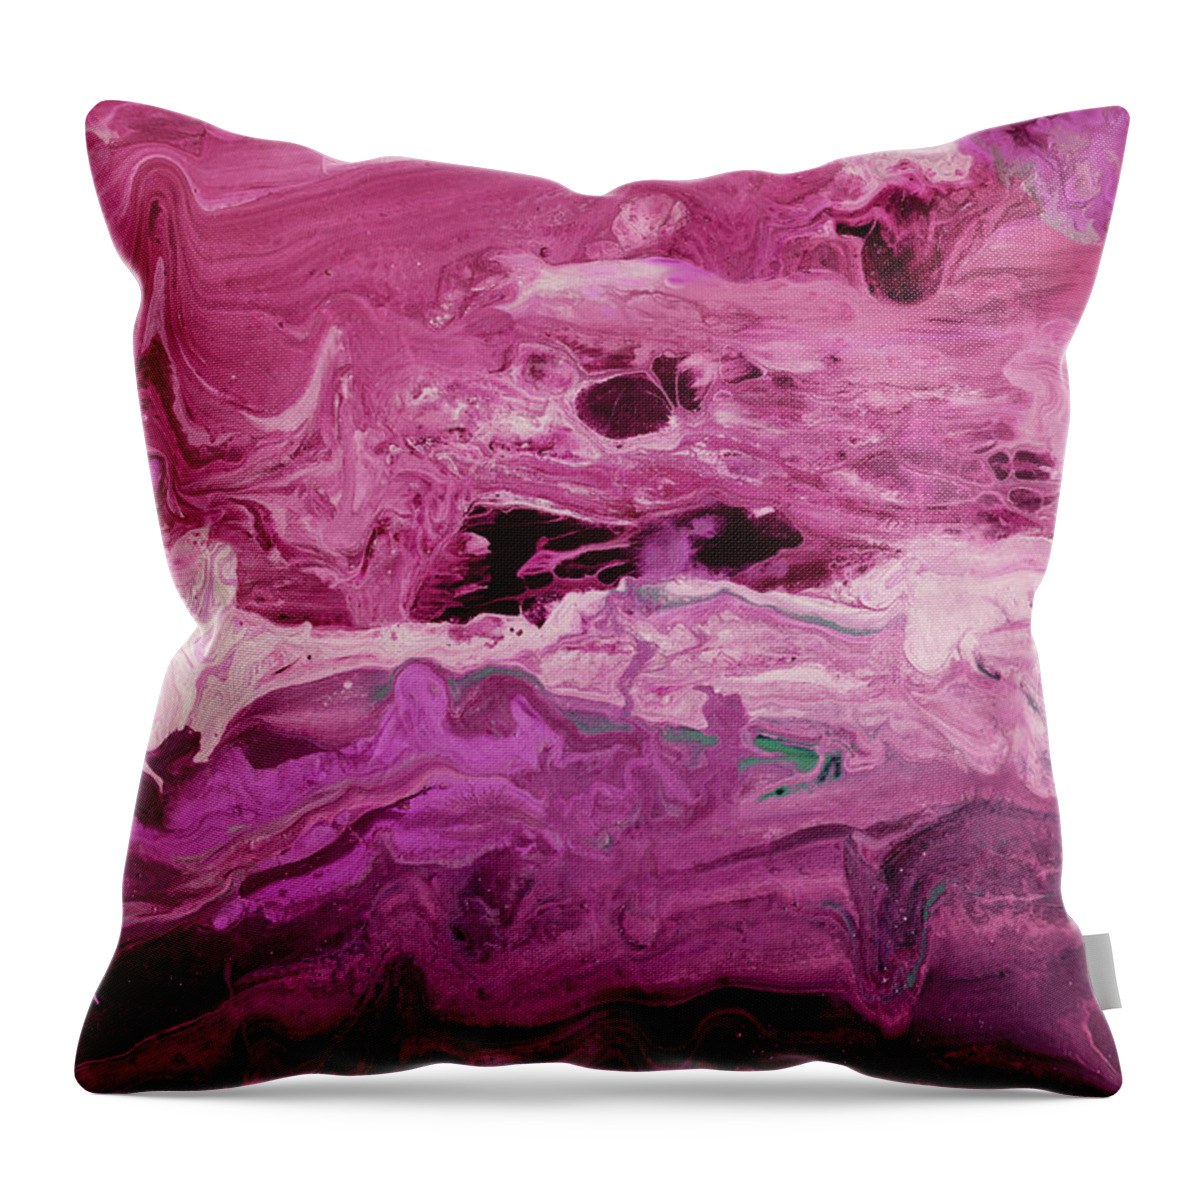 Abstract Throw Pillow featuring the mixed media Rhapsody 2- Art by Linda Woods by Linda Woods